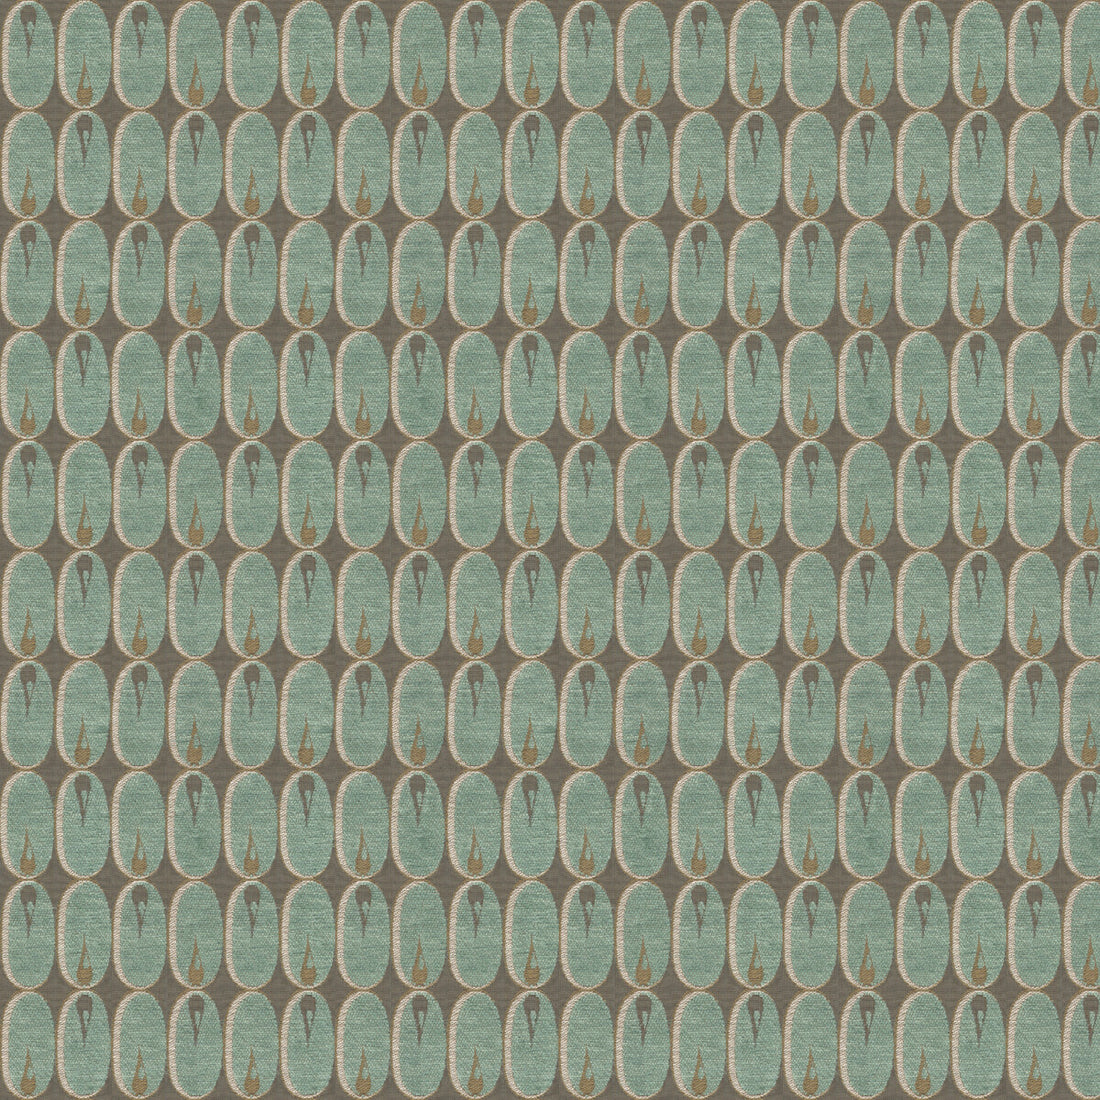 Oval Flame fabric in aqua color - pattern GWF-2924.13.0 - by Lee Jofa Modern in the Allegra Hicks II collection